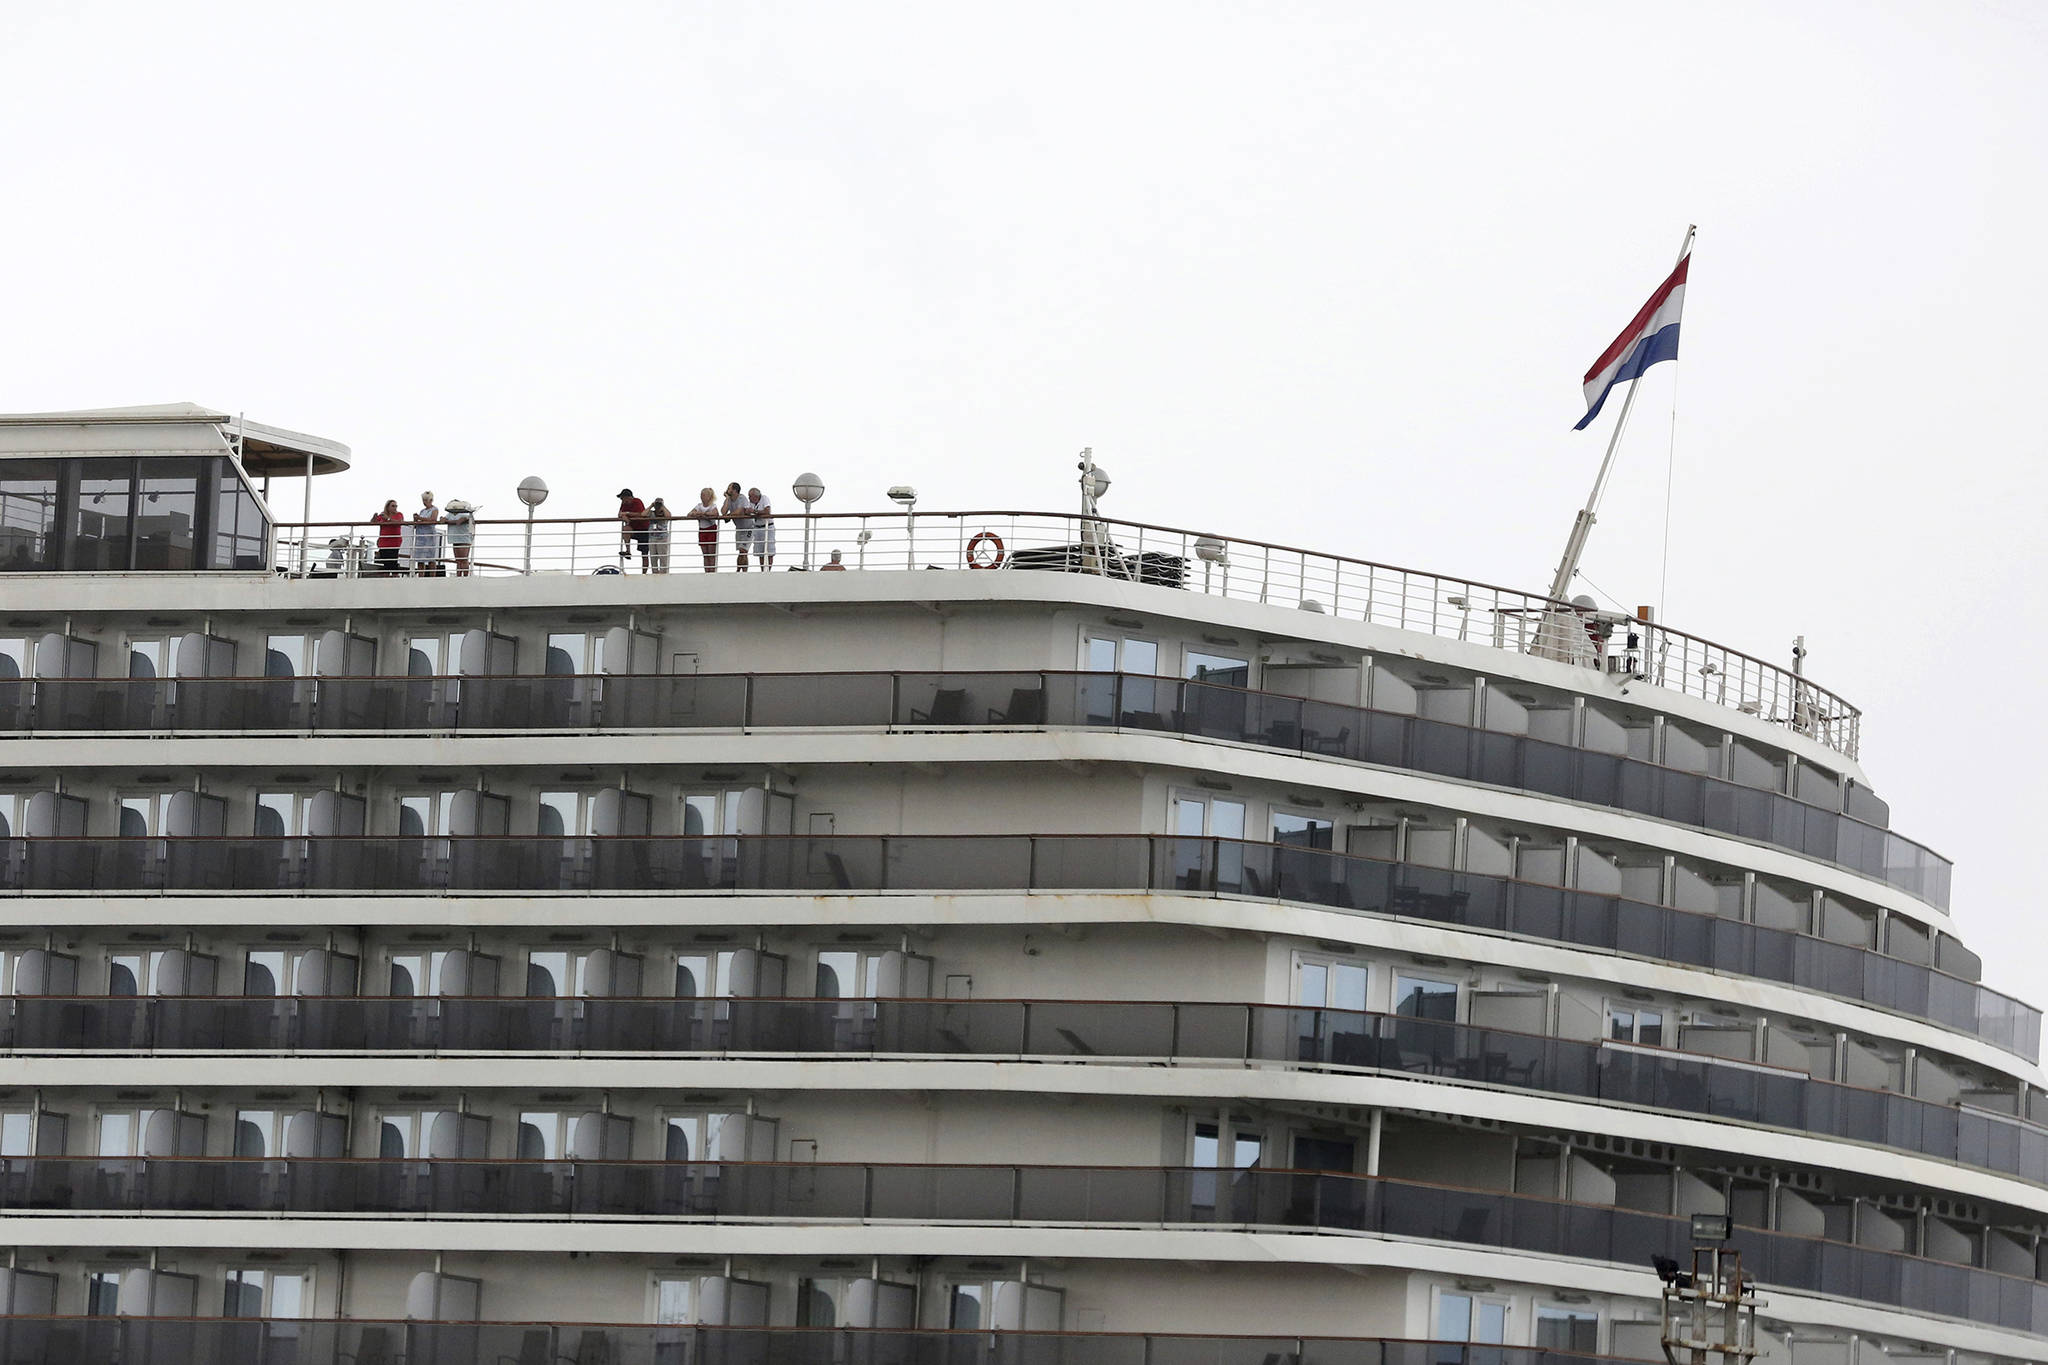 Passengers stand on the top deck of the MS Westerdam while the cruise ship is docked in Sihanoukville, Cambodia Monday, Feb. 17, 2020. (AP Photo)